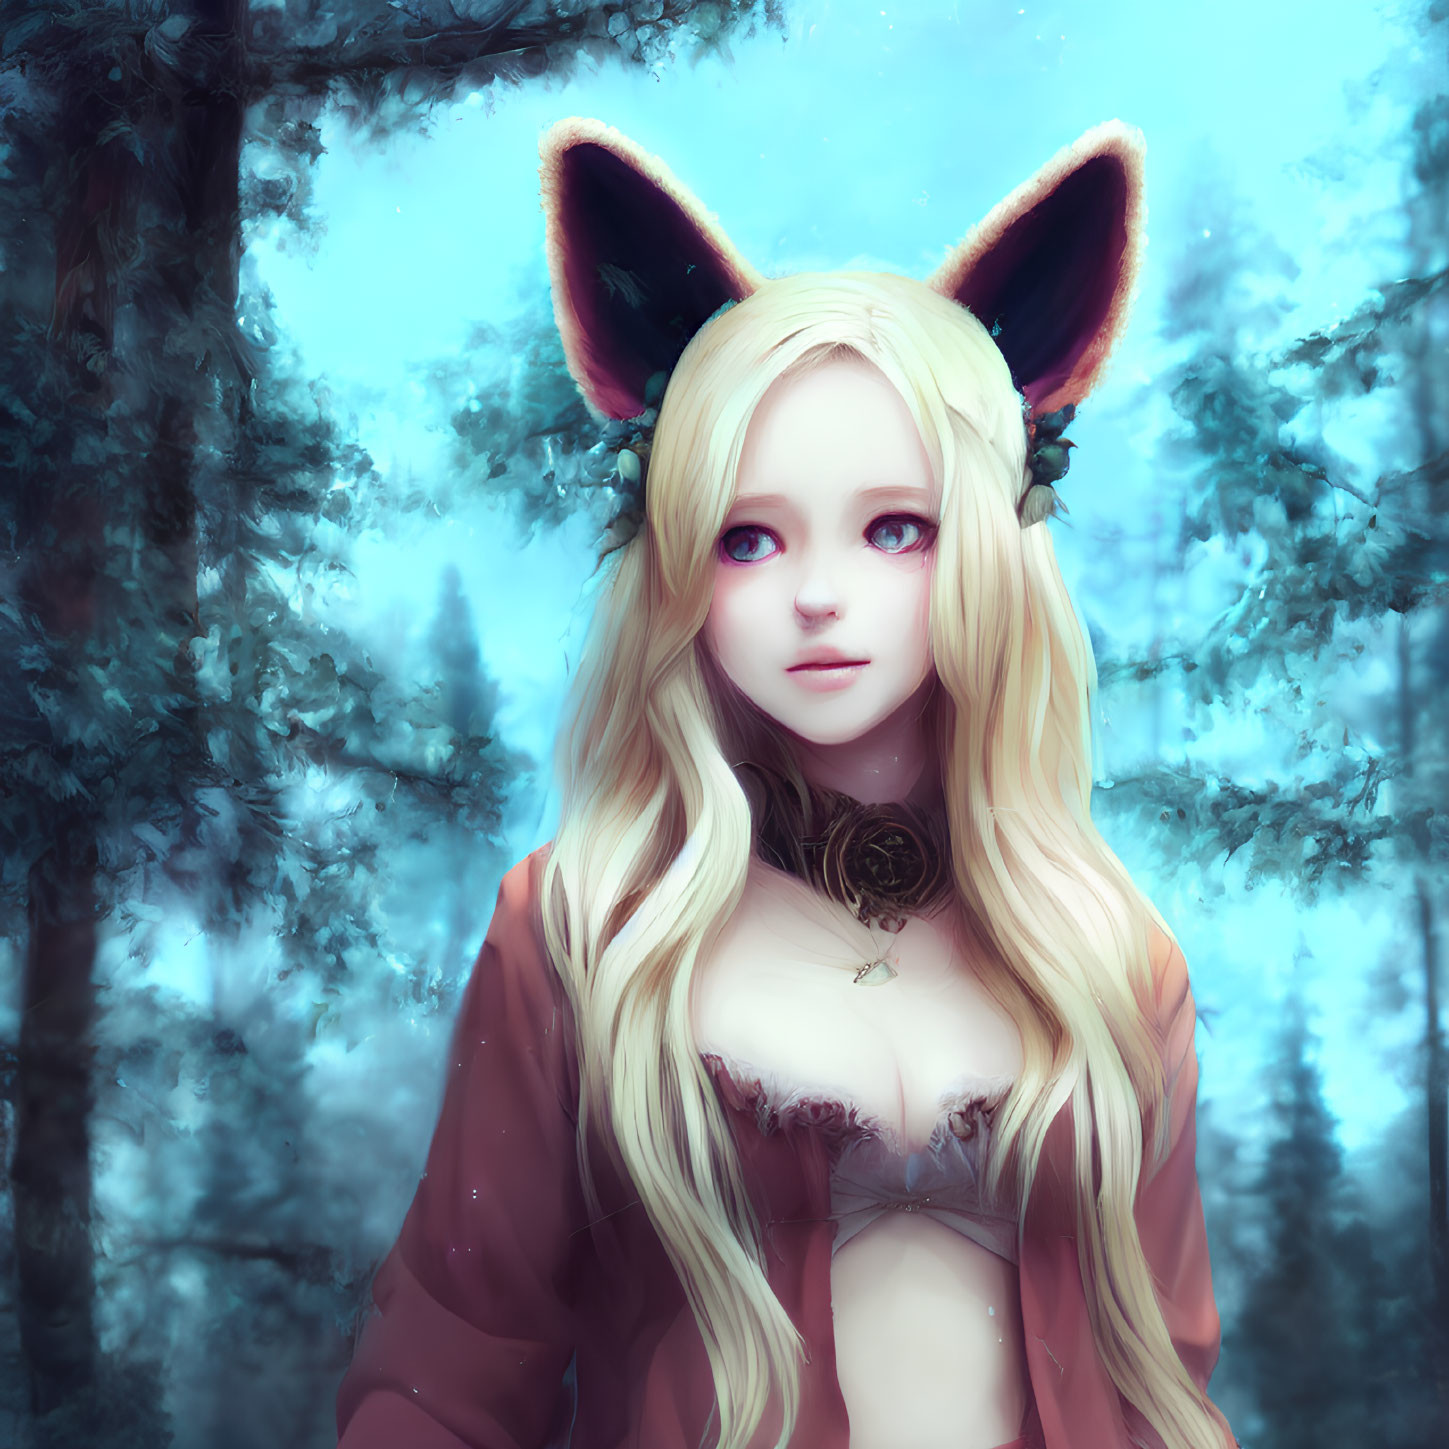 Blond-Haired Anime Character with Fox Ears in Mystic Forest